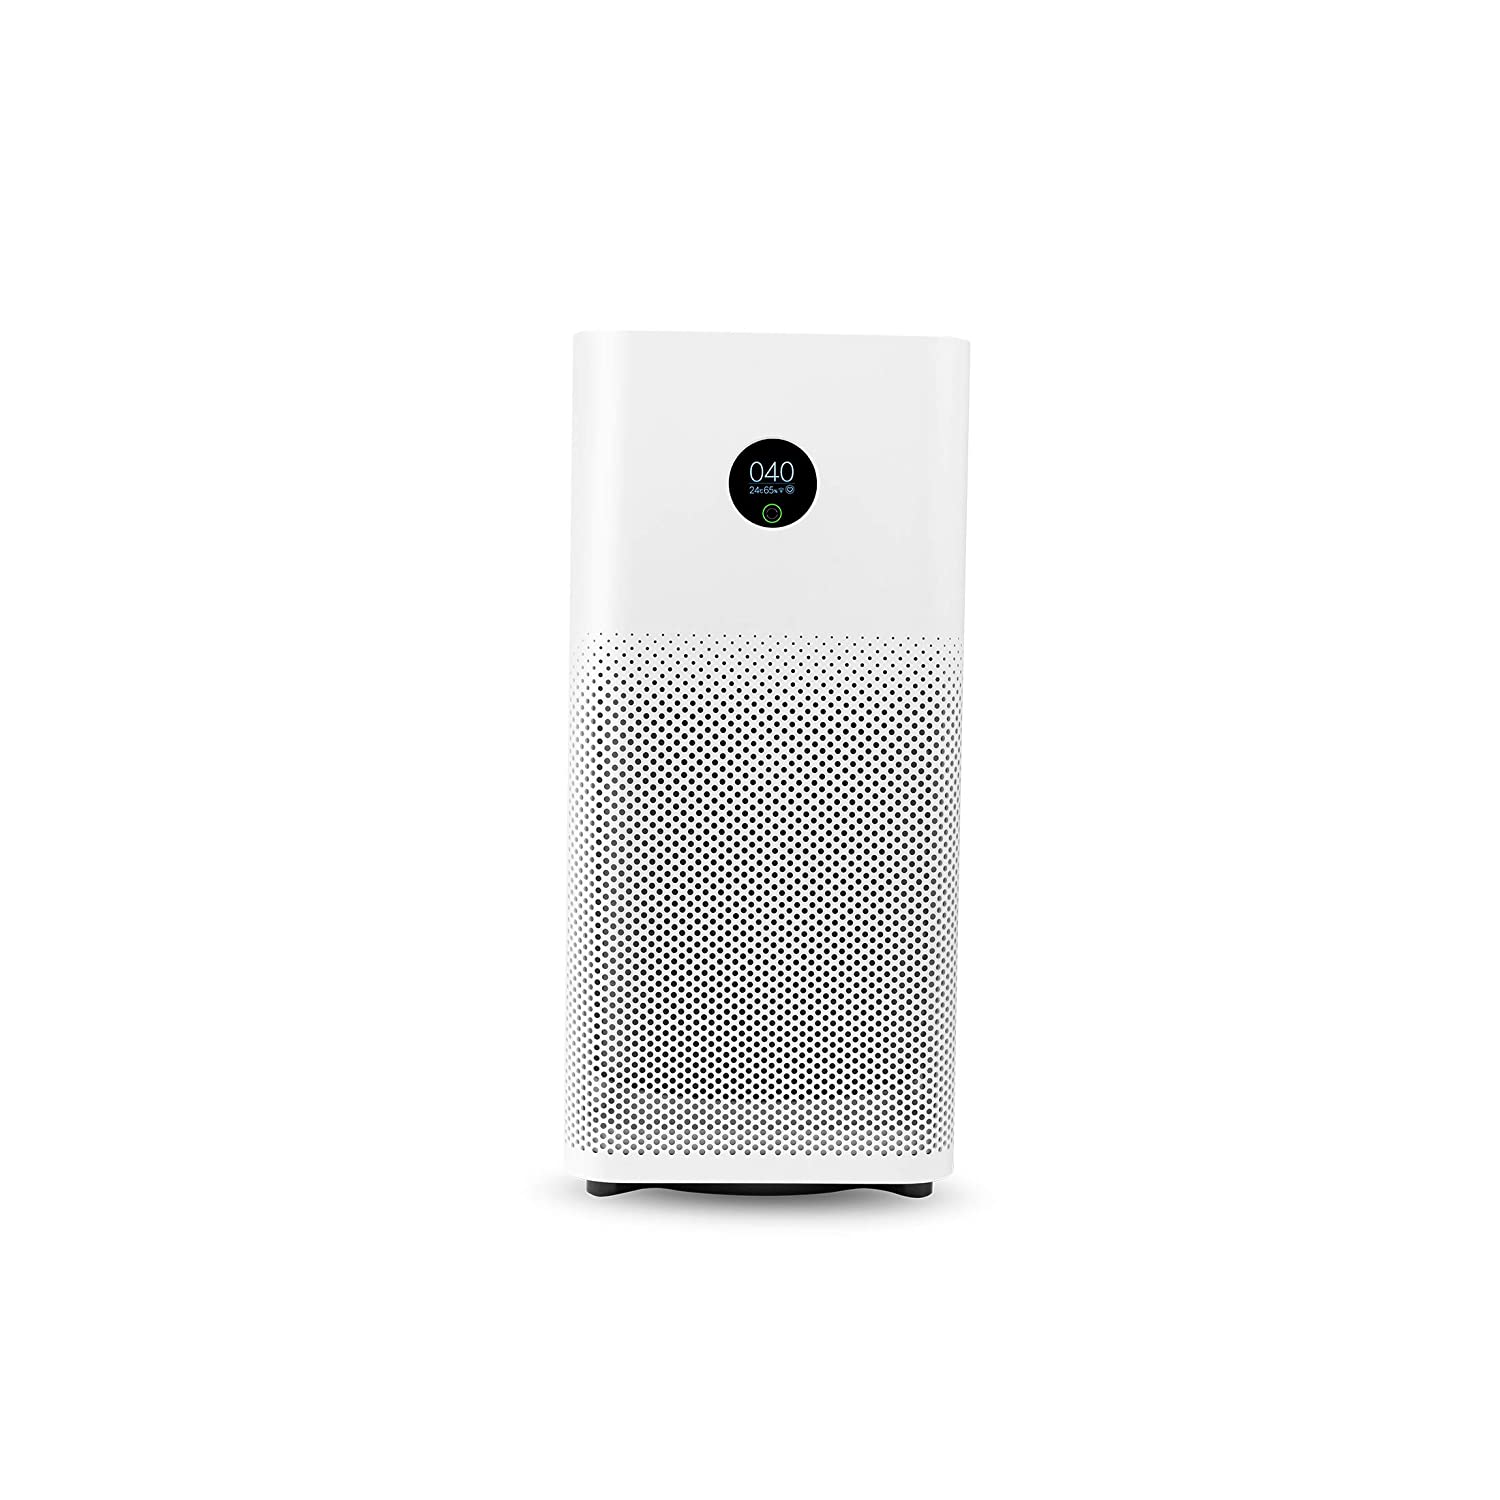 Mi air purifier 3 review & price in India